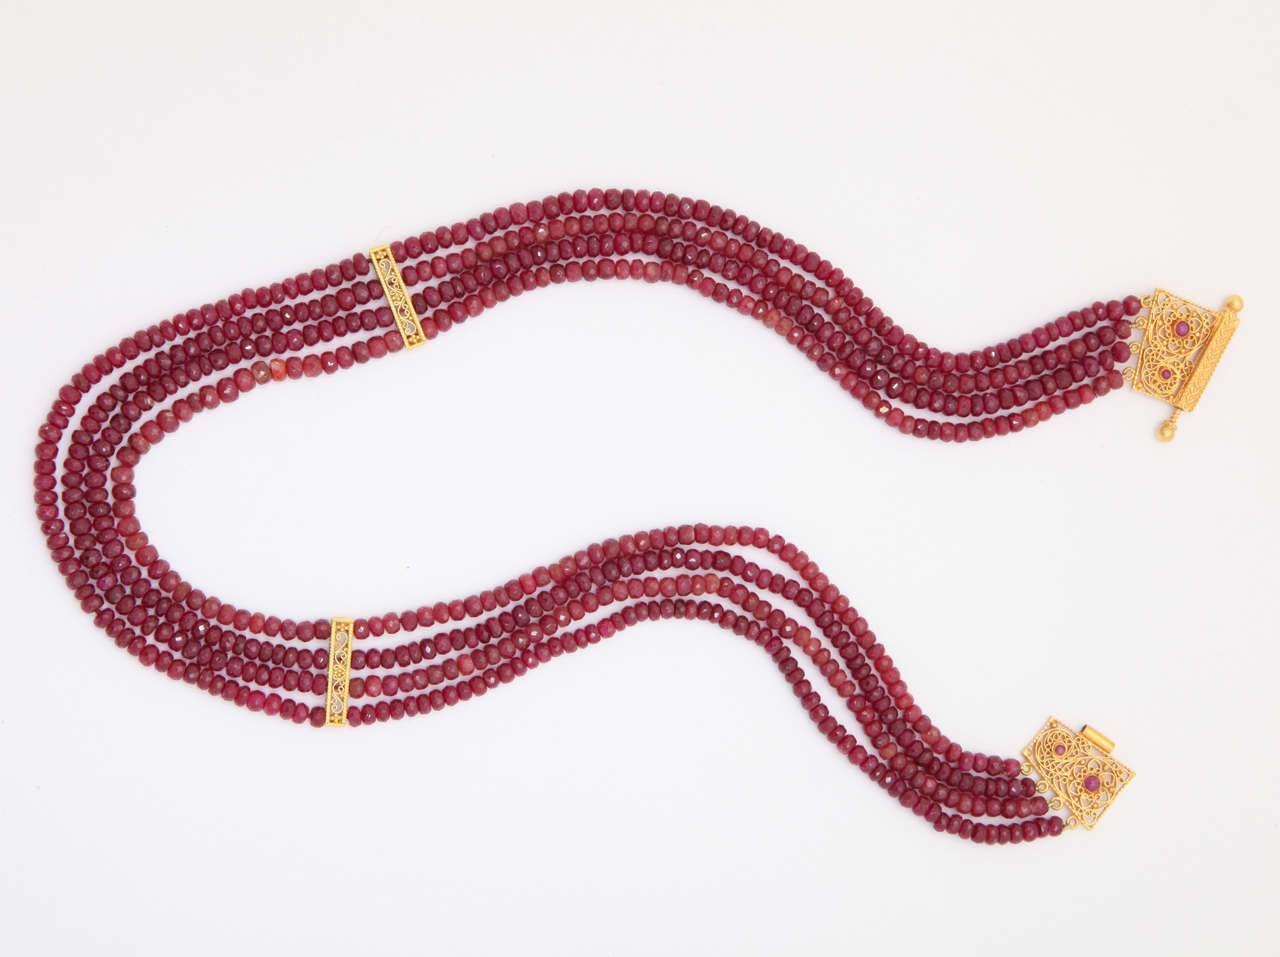 This 4 strand faceted ruby bead necklace is elegant and classic. The four strands are separated  by 18 kt  hand made wire scroll dividers. The spectacular, also hand made, clasp is 18 kt with ruby cabs. The clasp opens with a central screw. The